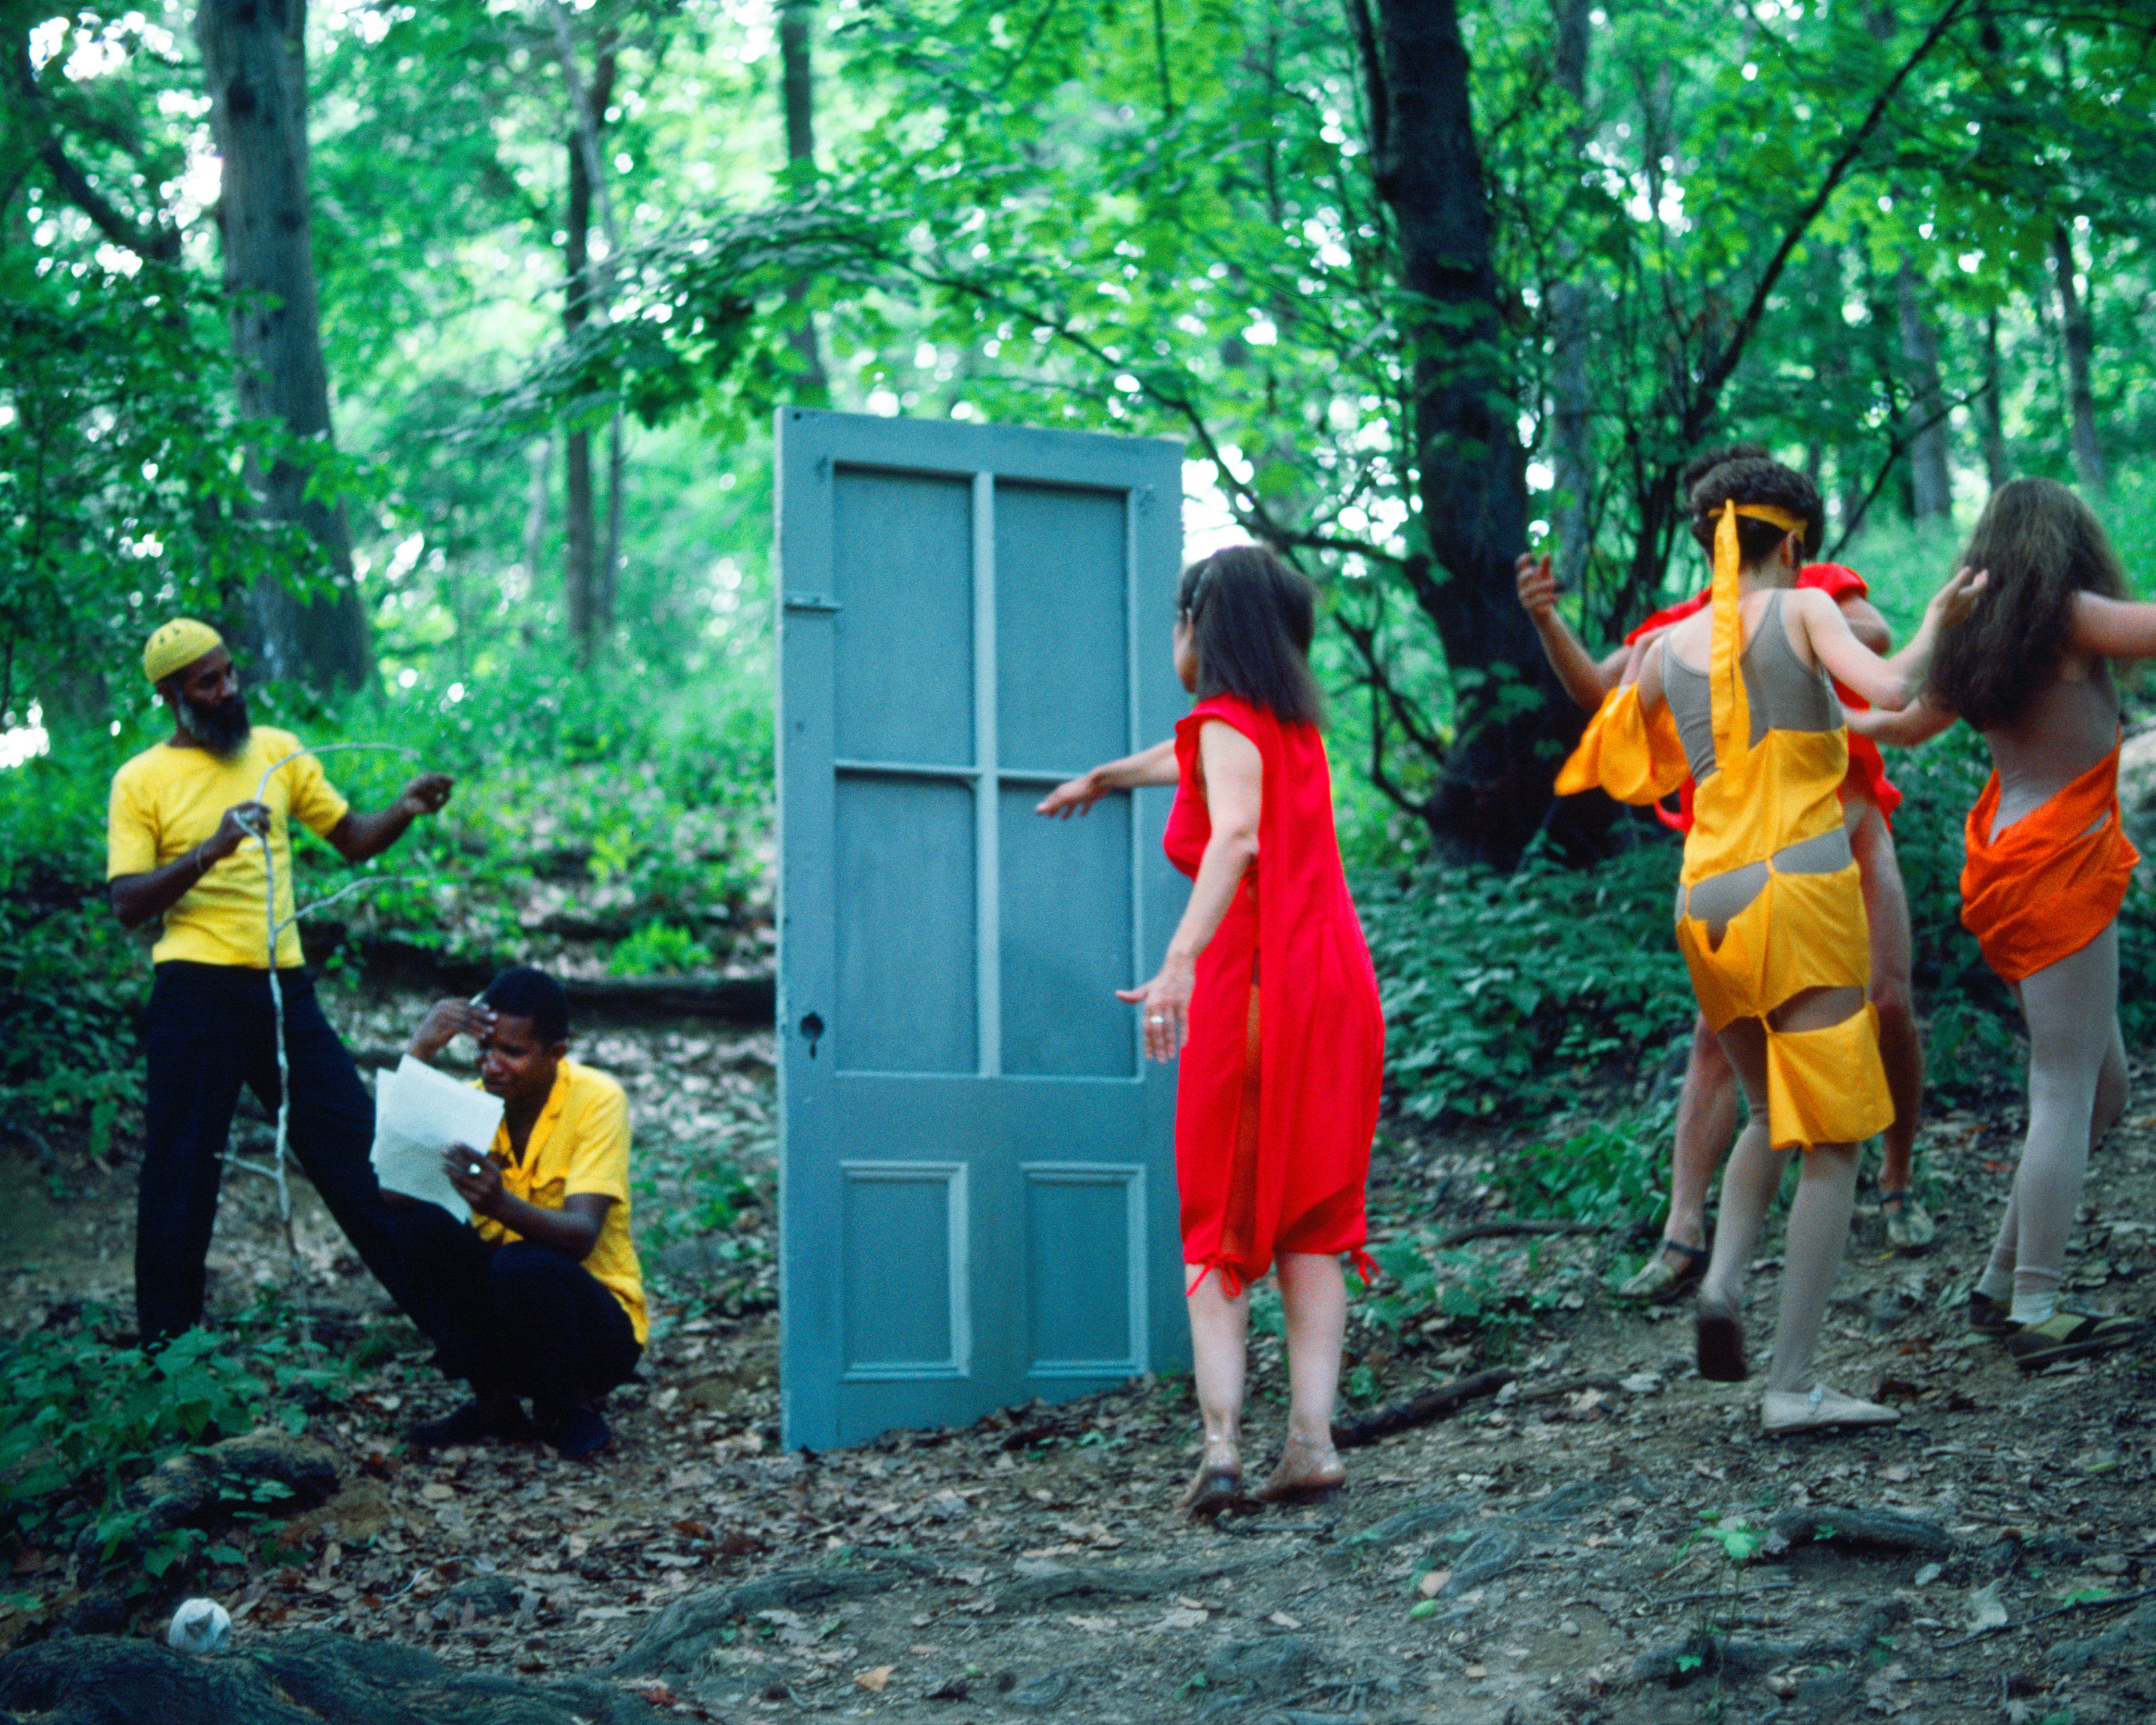 Rivers, First Draft: The Woman in Red goes to the Black Male Artists&rsquo; door and the Debauchees dance back up the hill, 1982/2015, Digital C-print from Kodachrome 35mm slides in 48 parts, 16h x 20w in (40.64h x 50.80w cm)